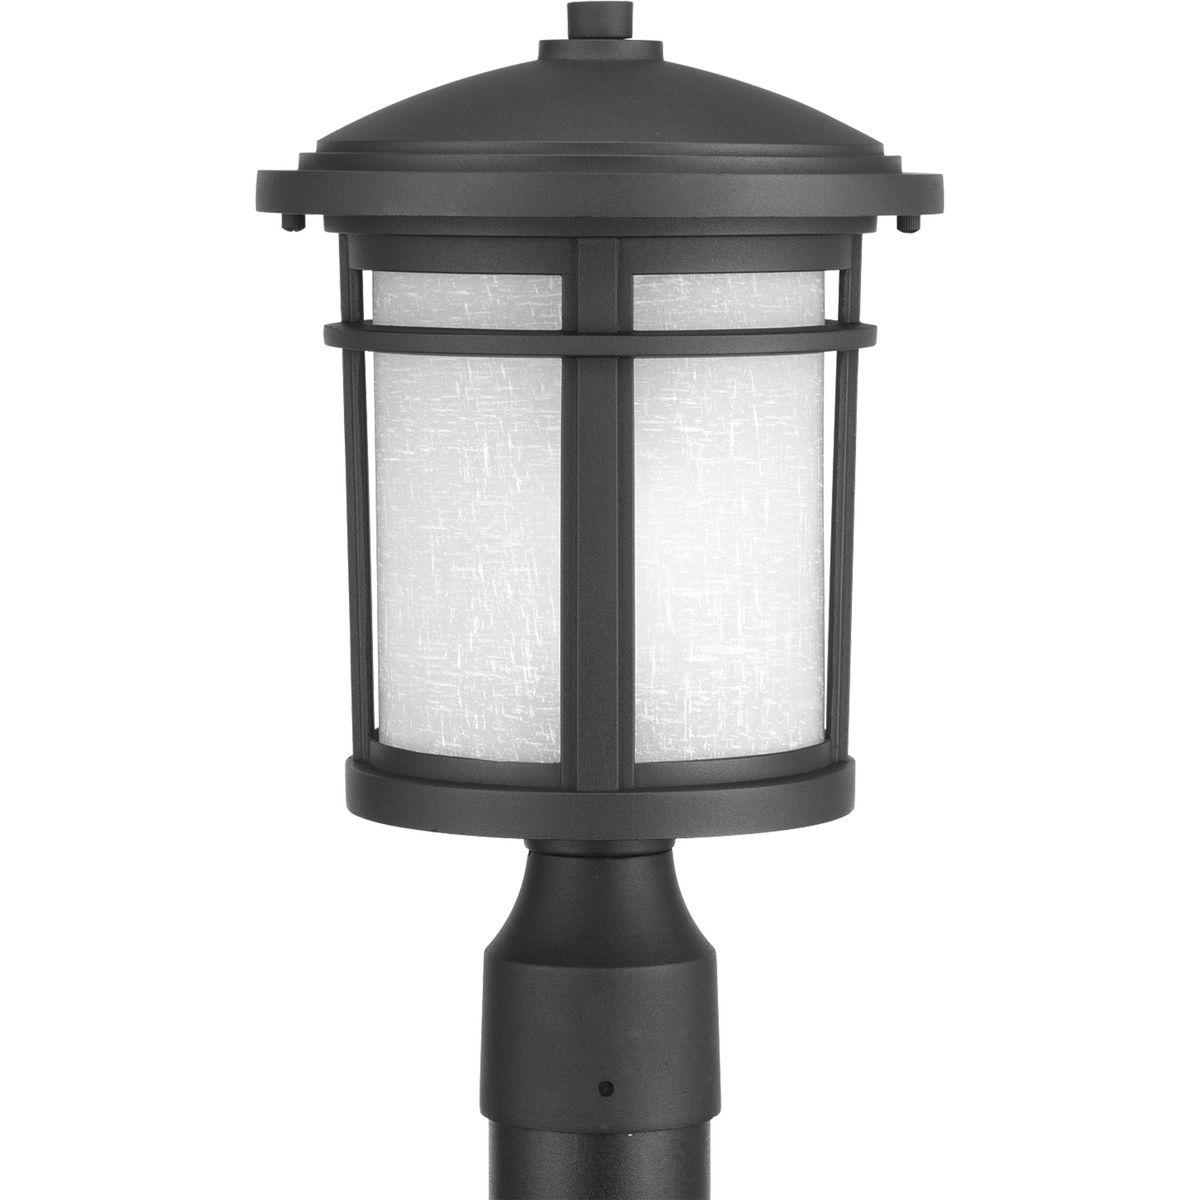 Hubbell P6424-3130K9 LED post lantern with etched white linen glass. Fits 3" posts order separately. 120V AC replaceable LED module, 623 lumens (source), 3000K color temperature and 90+ CRI.  ; Etched white linen glass. ; Replaceable LED module. ; Powder coated finish. ; Meet